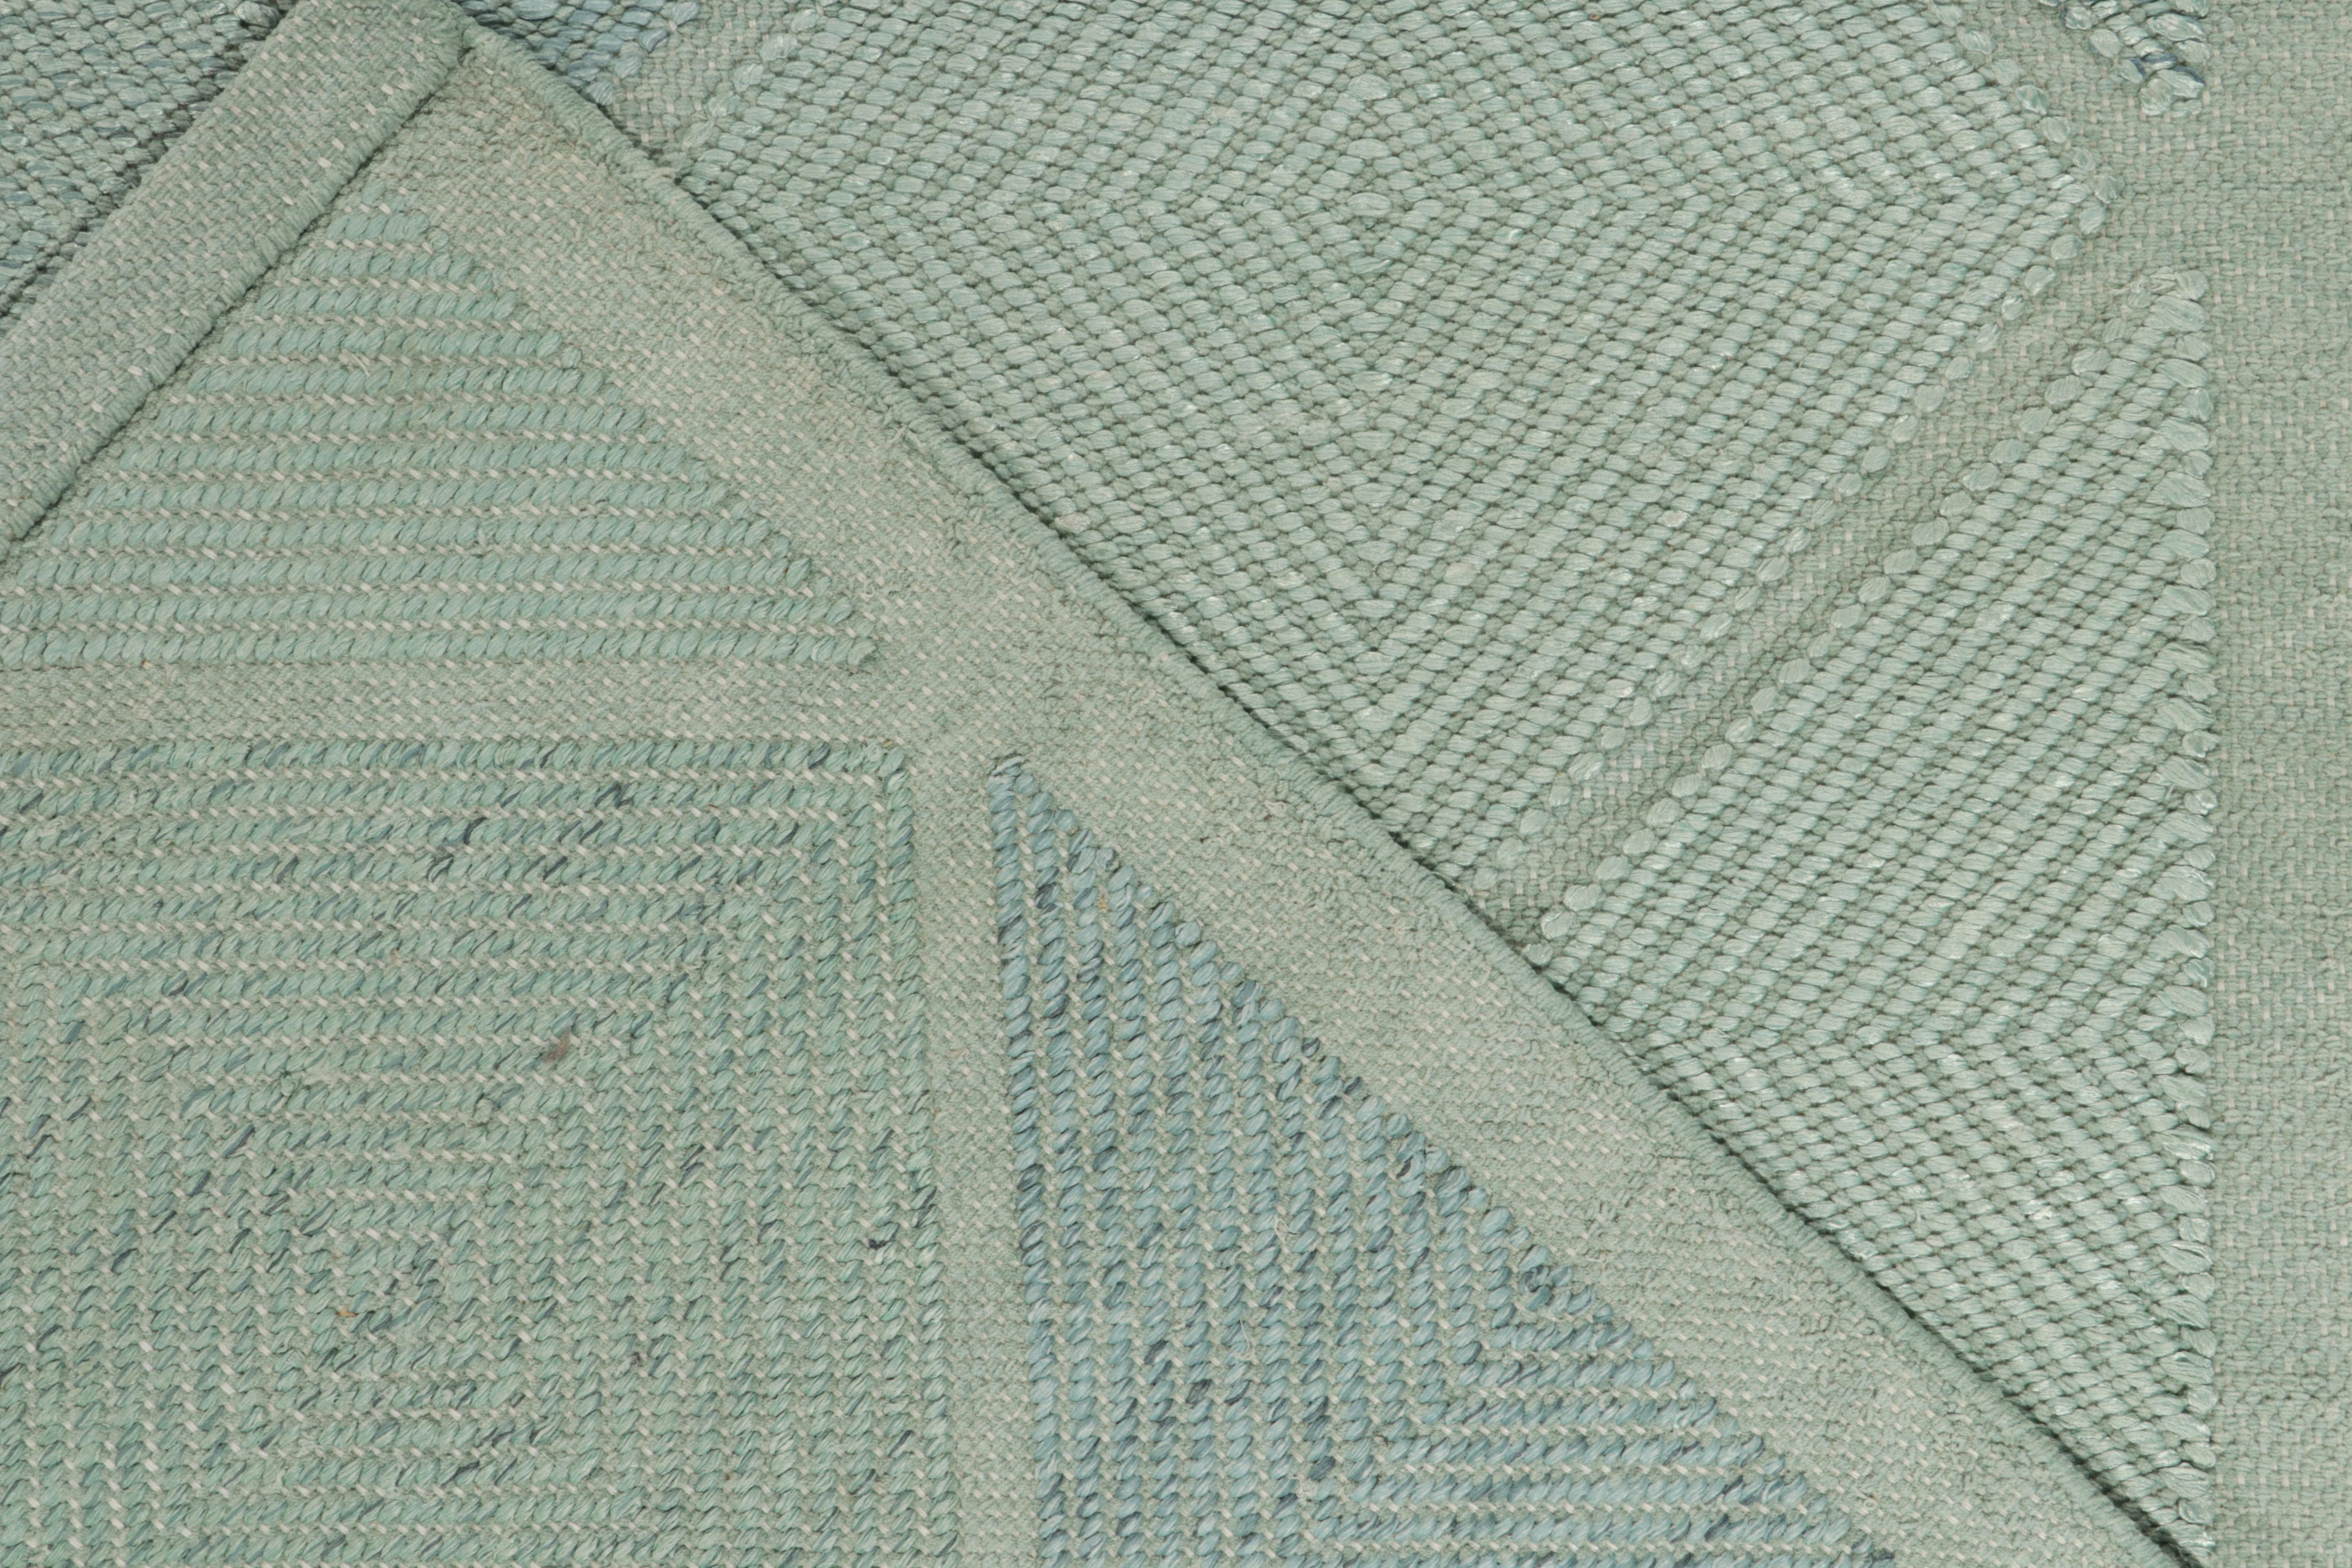 Rug & Kilim's Scandinavian Style Kilim Rug in Seafoam Blue Geometric Pattern In New Condition For Sale In Long Island City, NY